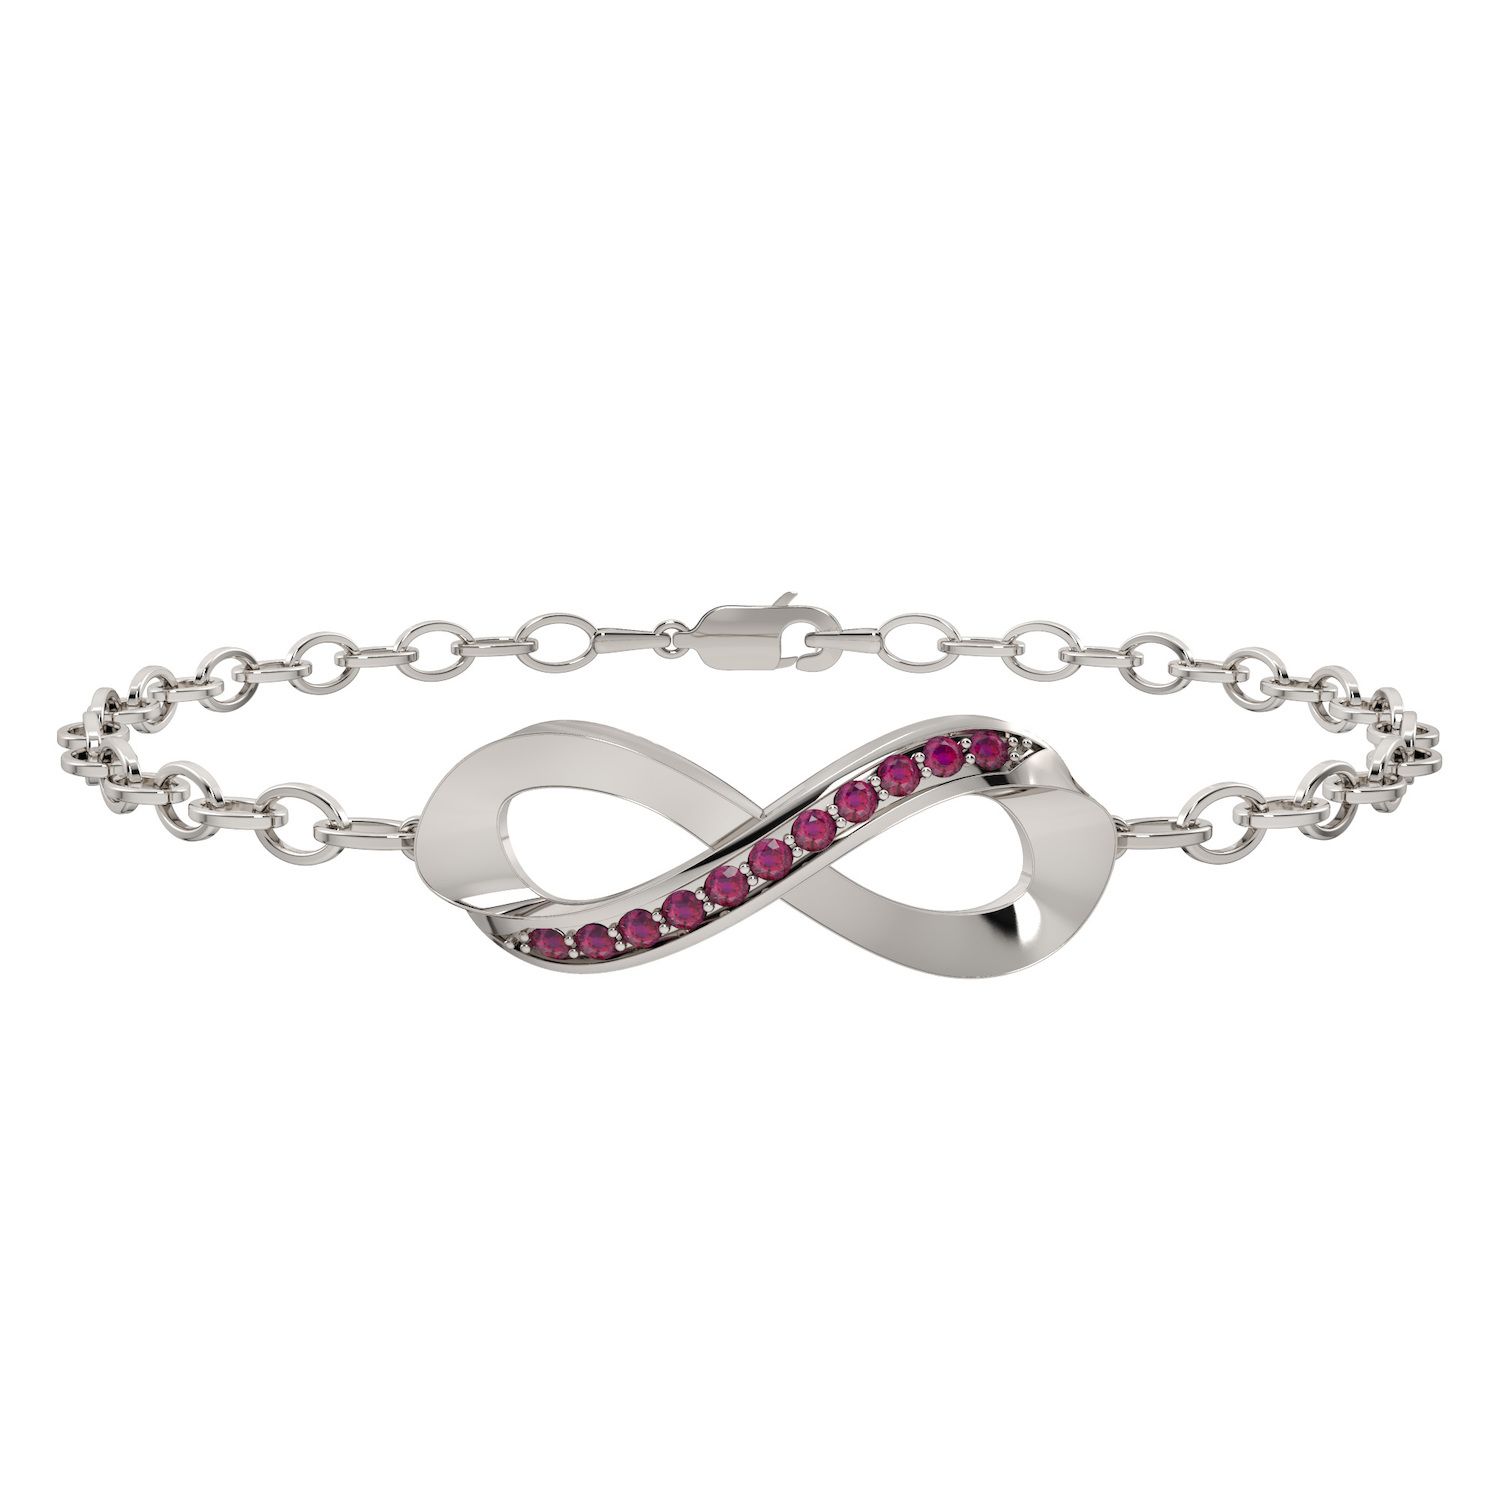 Love This Life® Besties Butterfly & Infinity Crystal Charm Bangle Bracelet